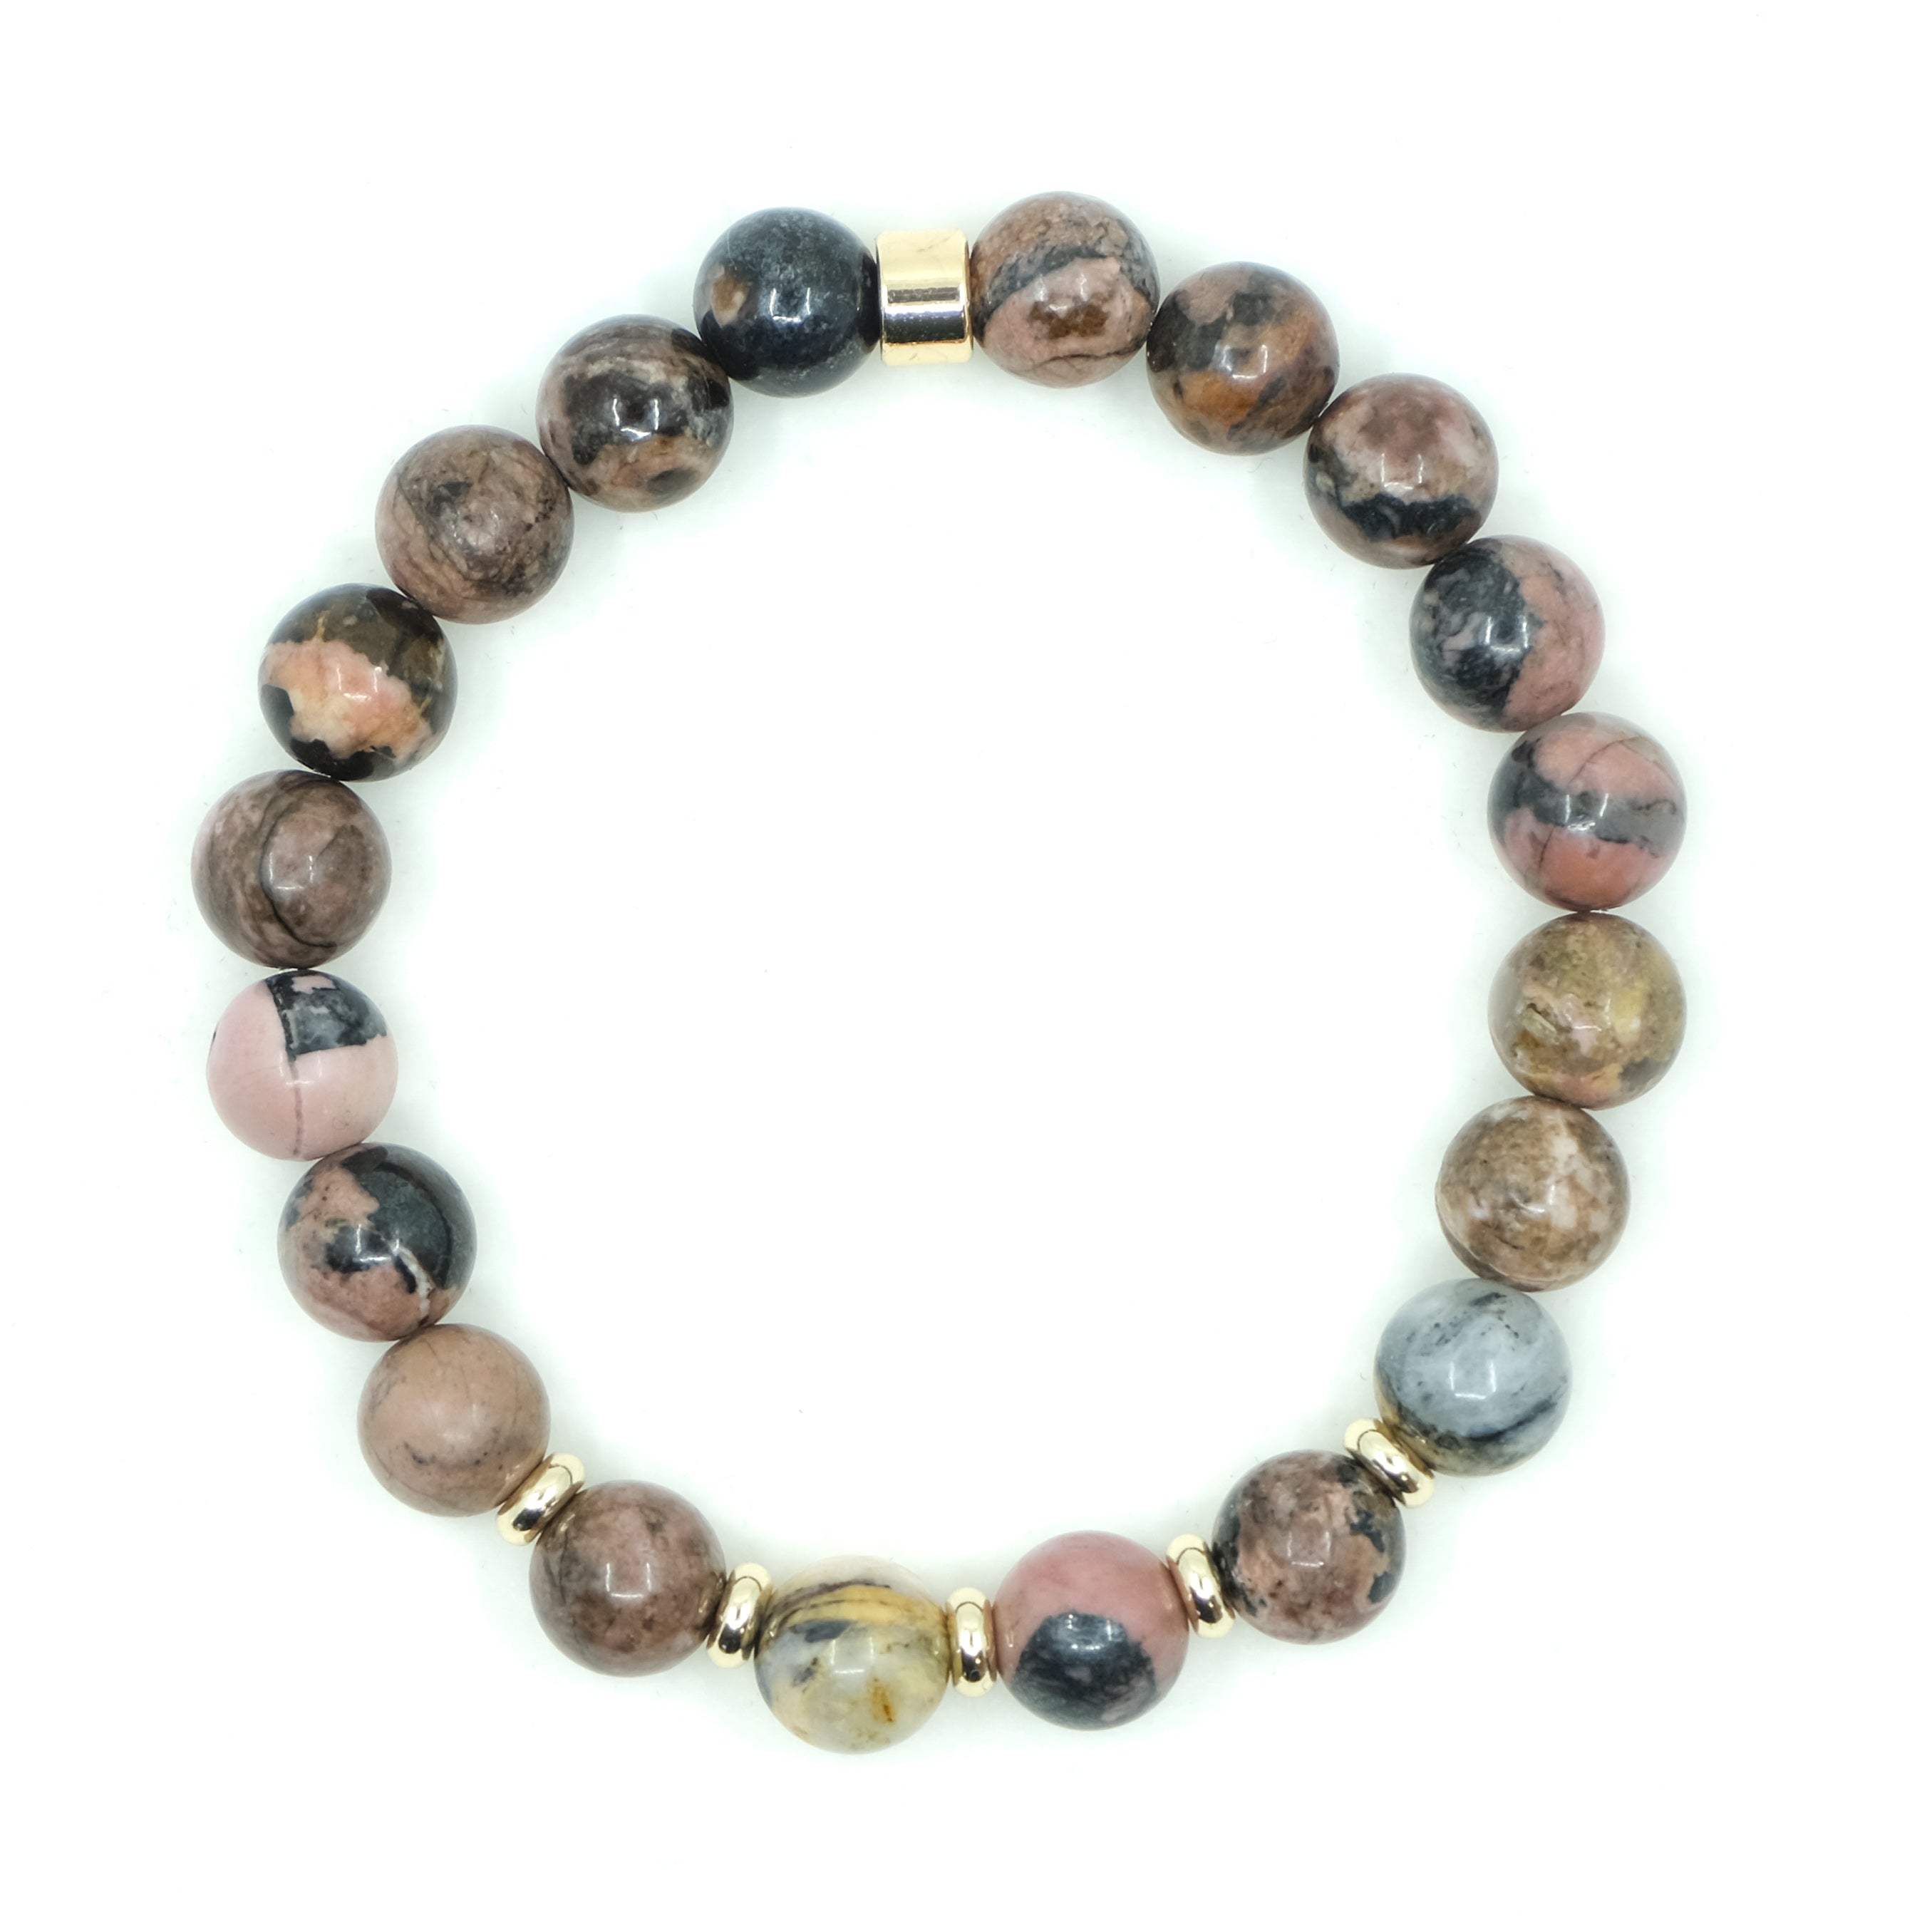 8mm Rhodonite bracelet with 18ct gold accessories from above